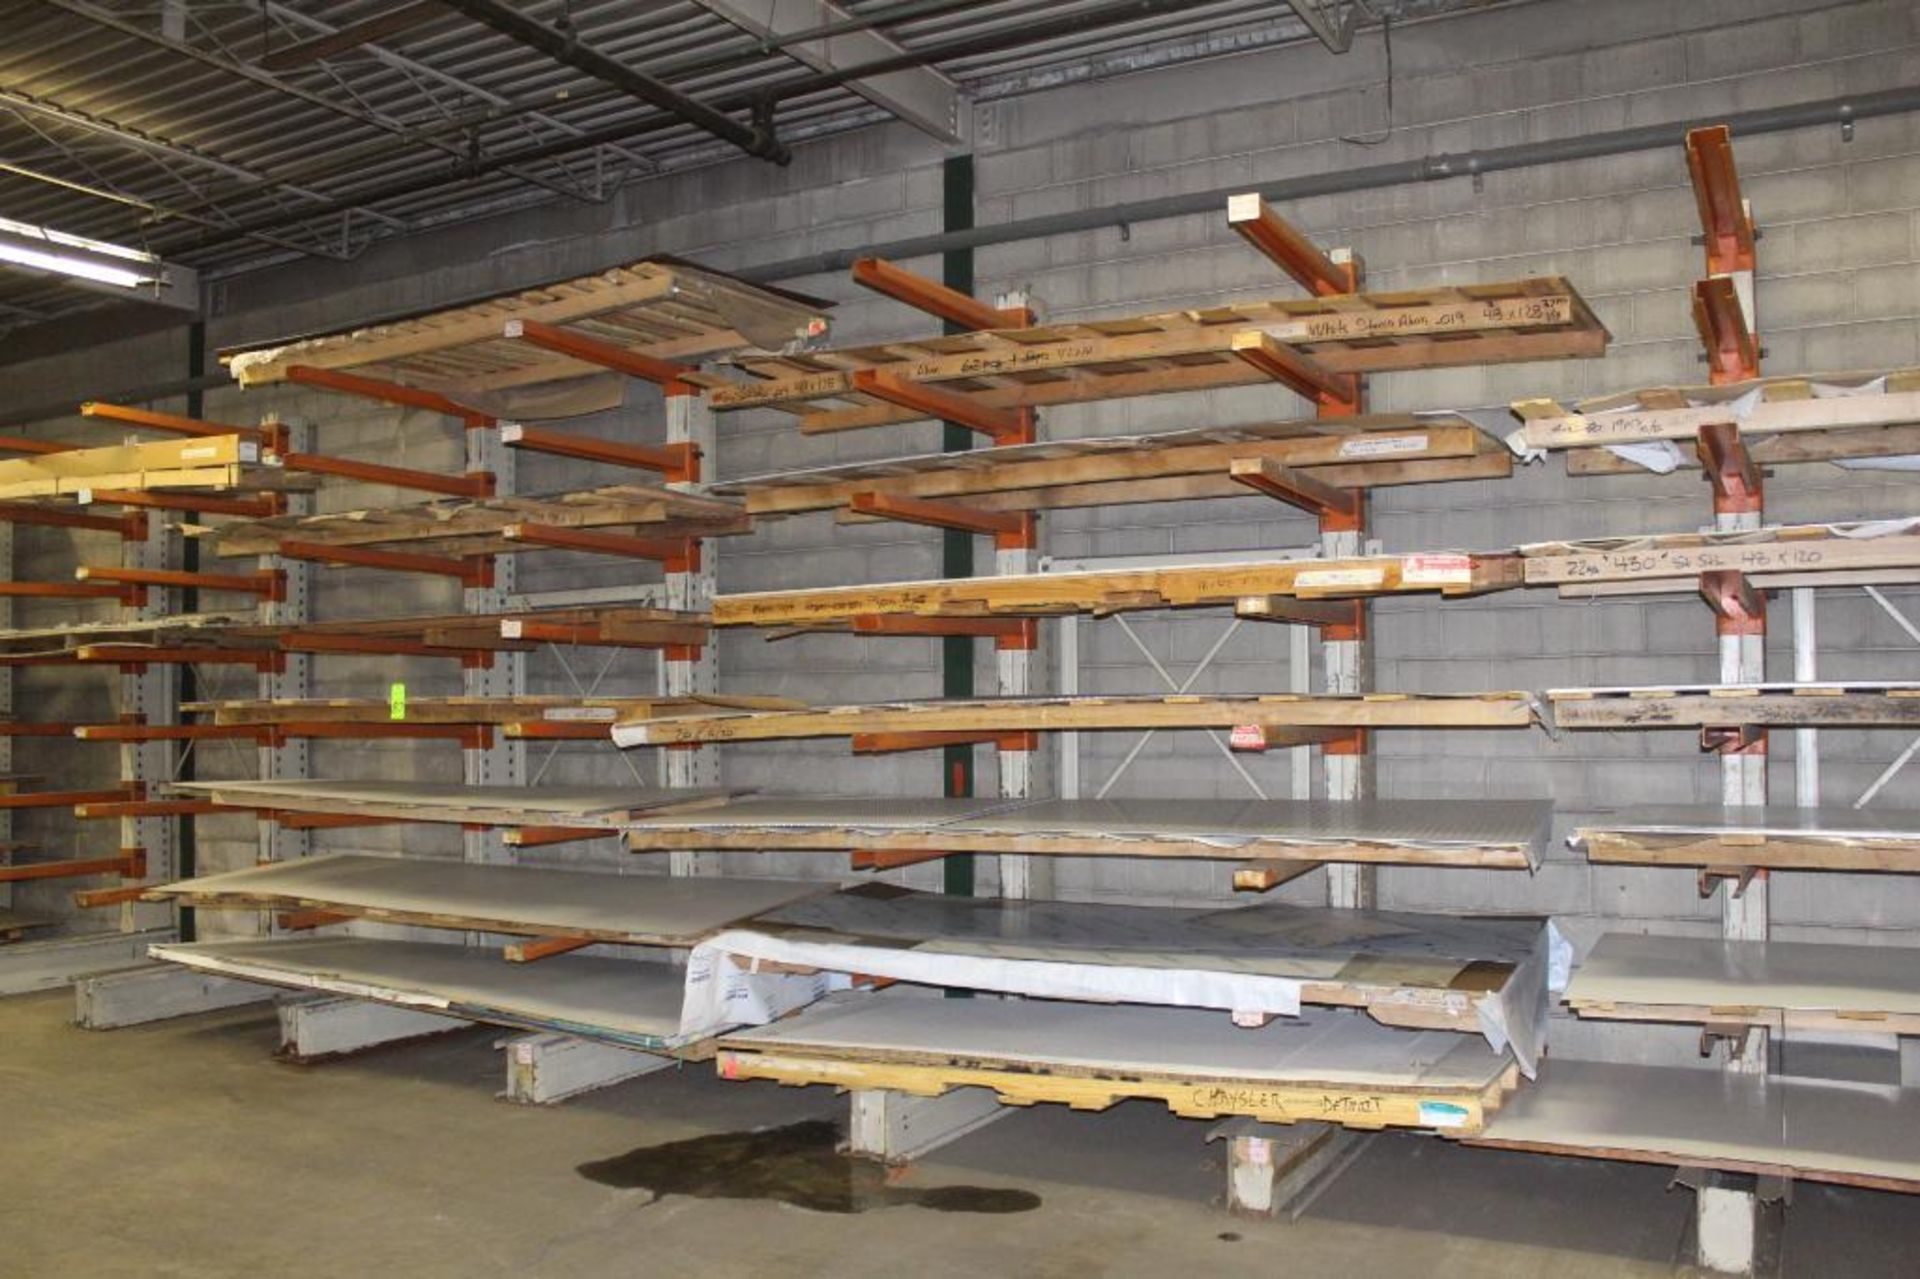 Lot of Assorted Sheet Stock, Treated & Coated Stainless Steel & Aluminum, Stock Only - No Racks Incl